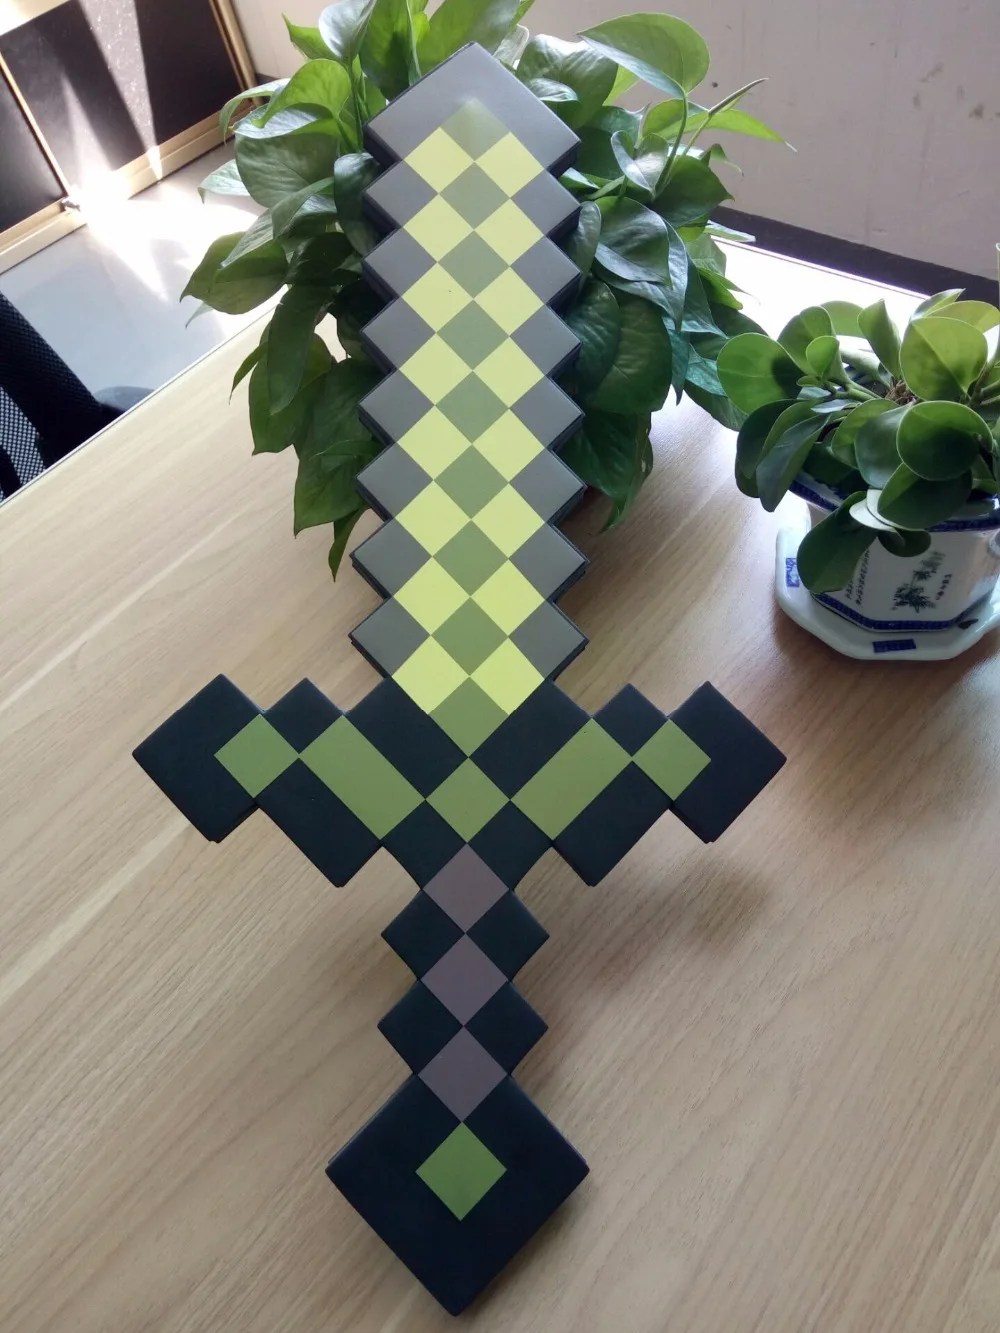 60cm Minecraft Toys Minecraft Sword EVA Model Toys Action Figures Toys For Kids Brinquedos Gifts